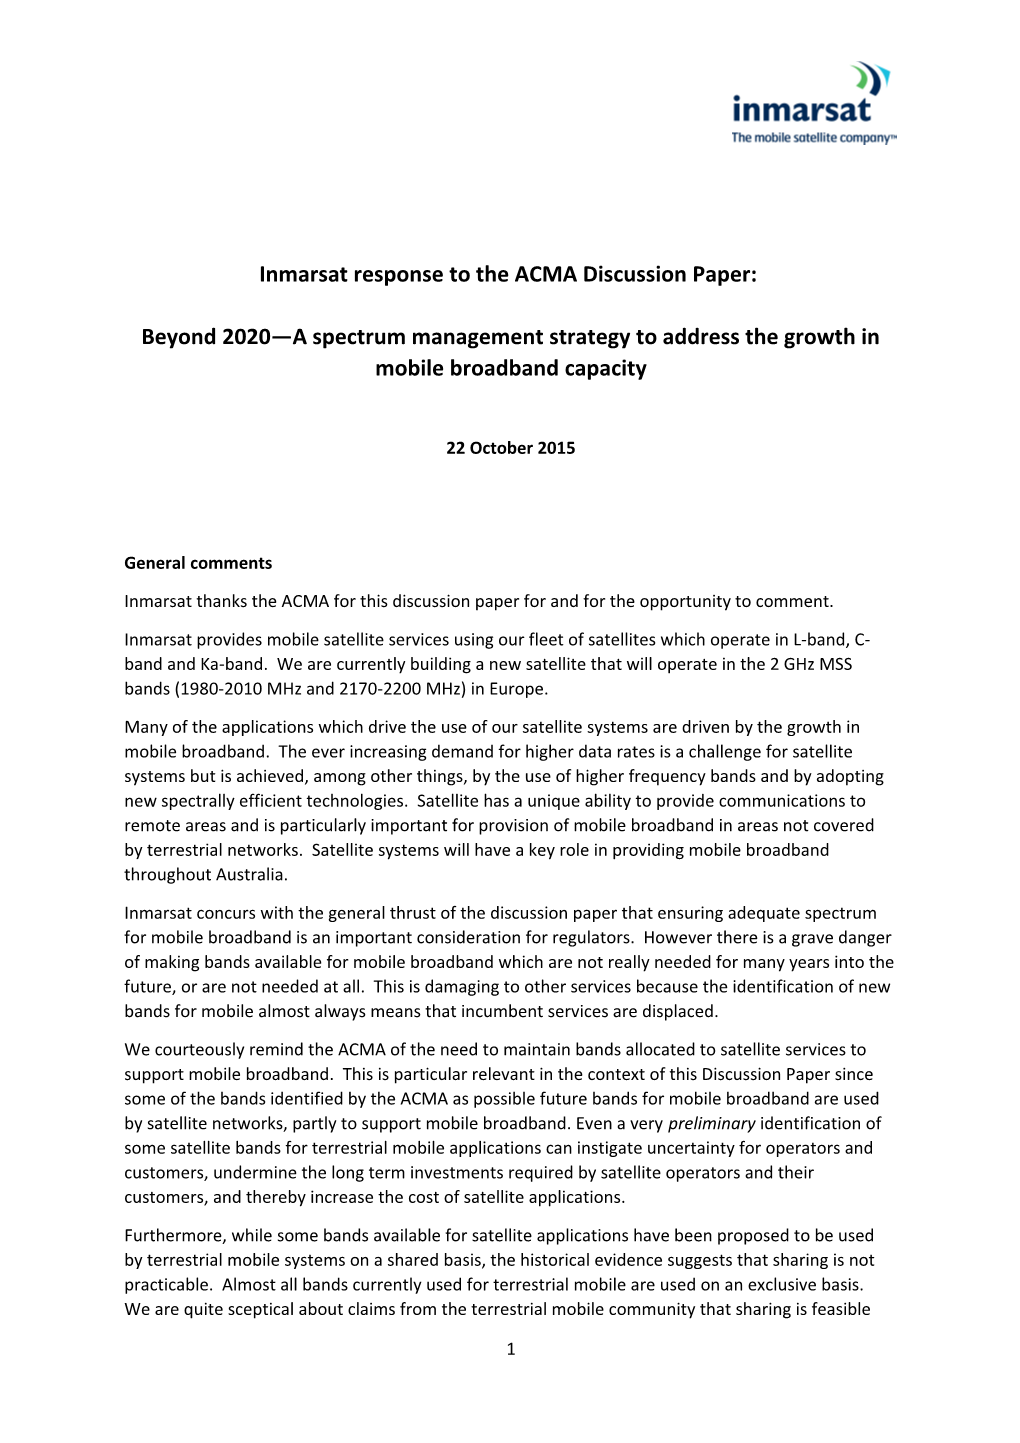 Inmarsat Response to the ACMA Discussion Paper: Beyond 2020 a Spectrum Management Strategy